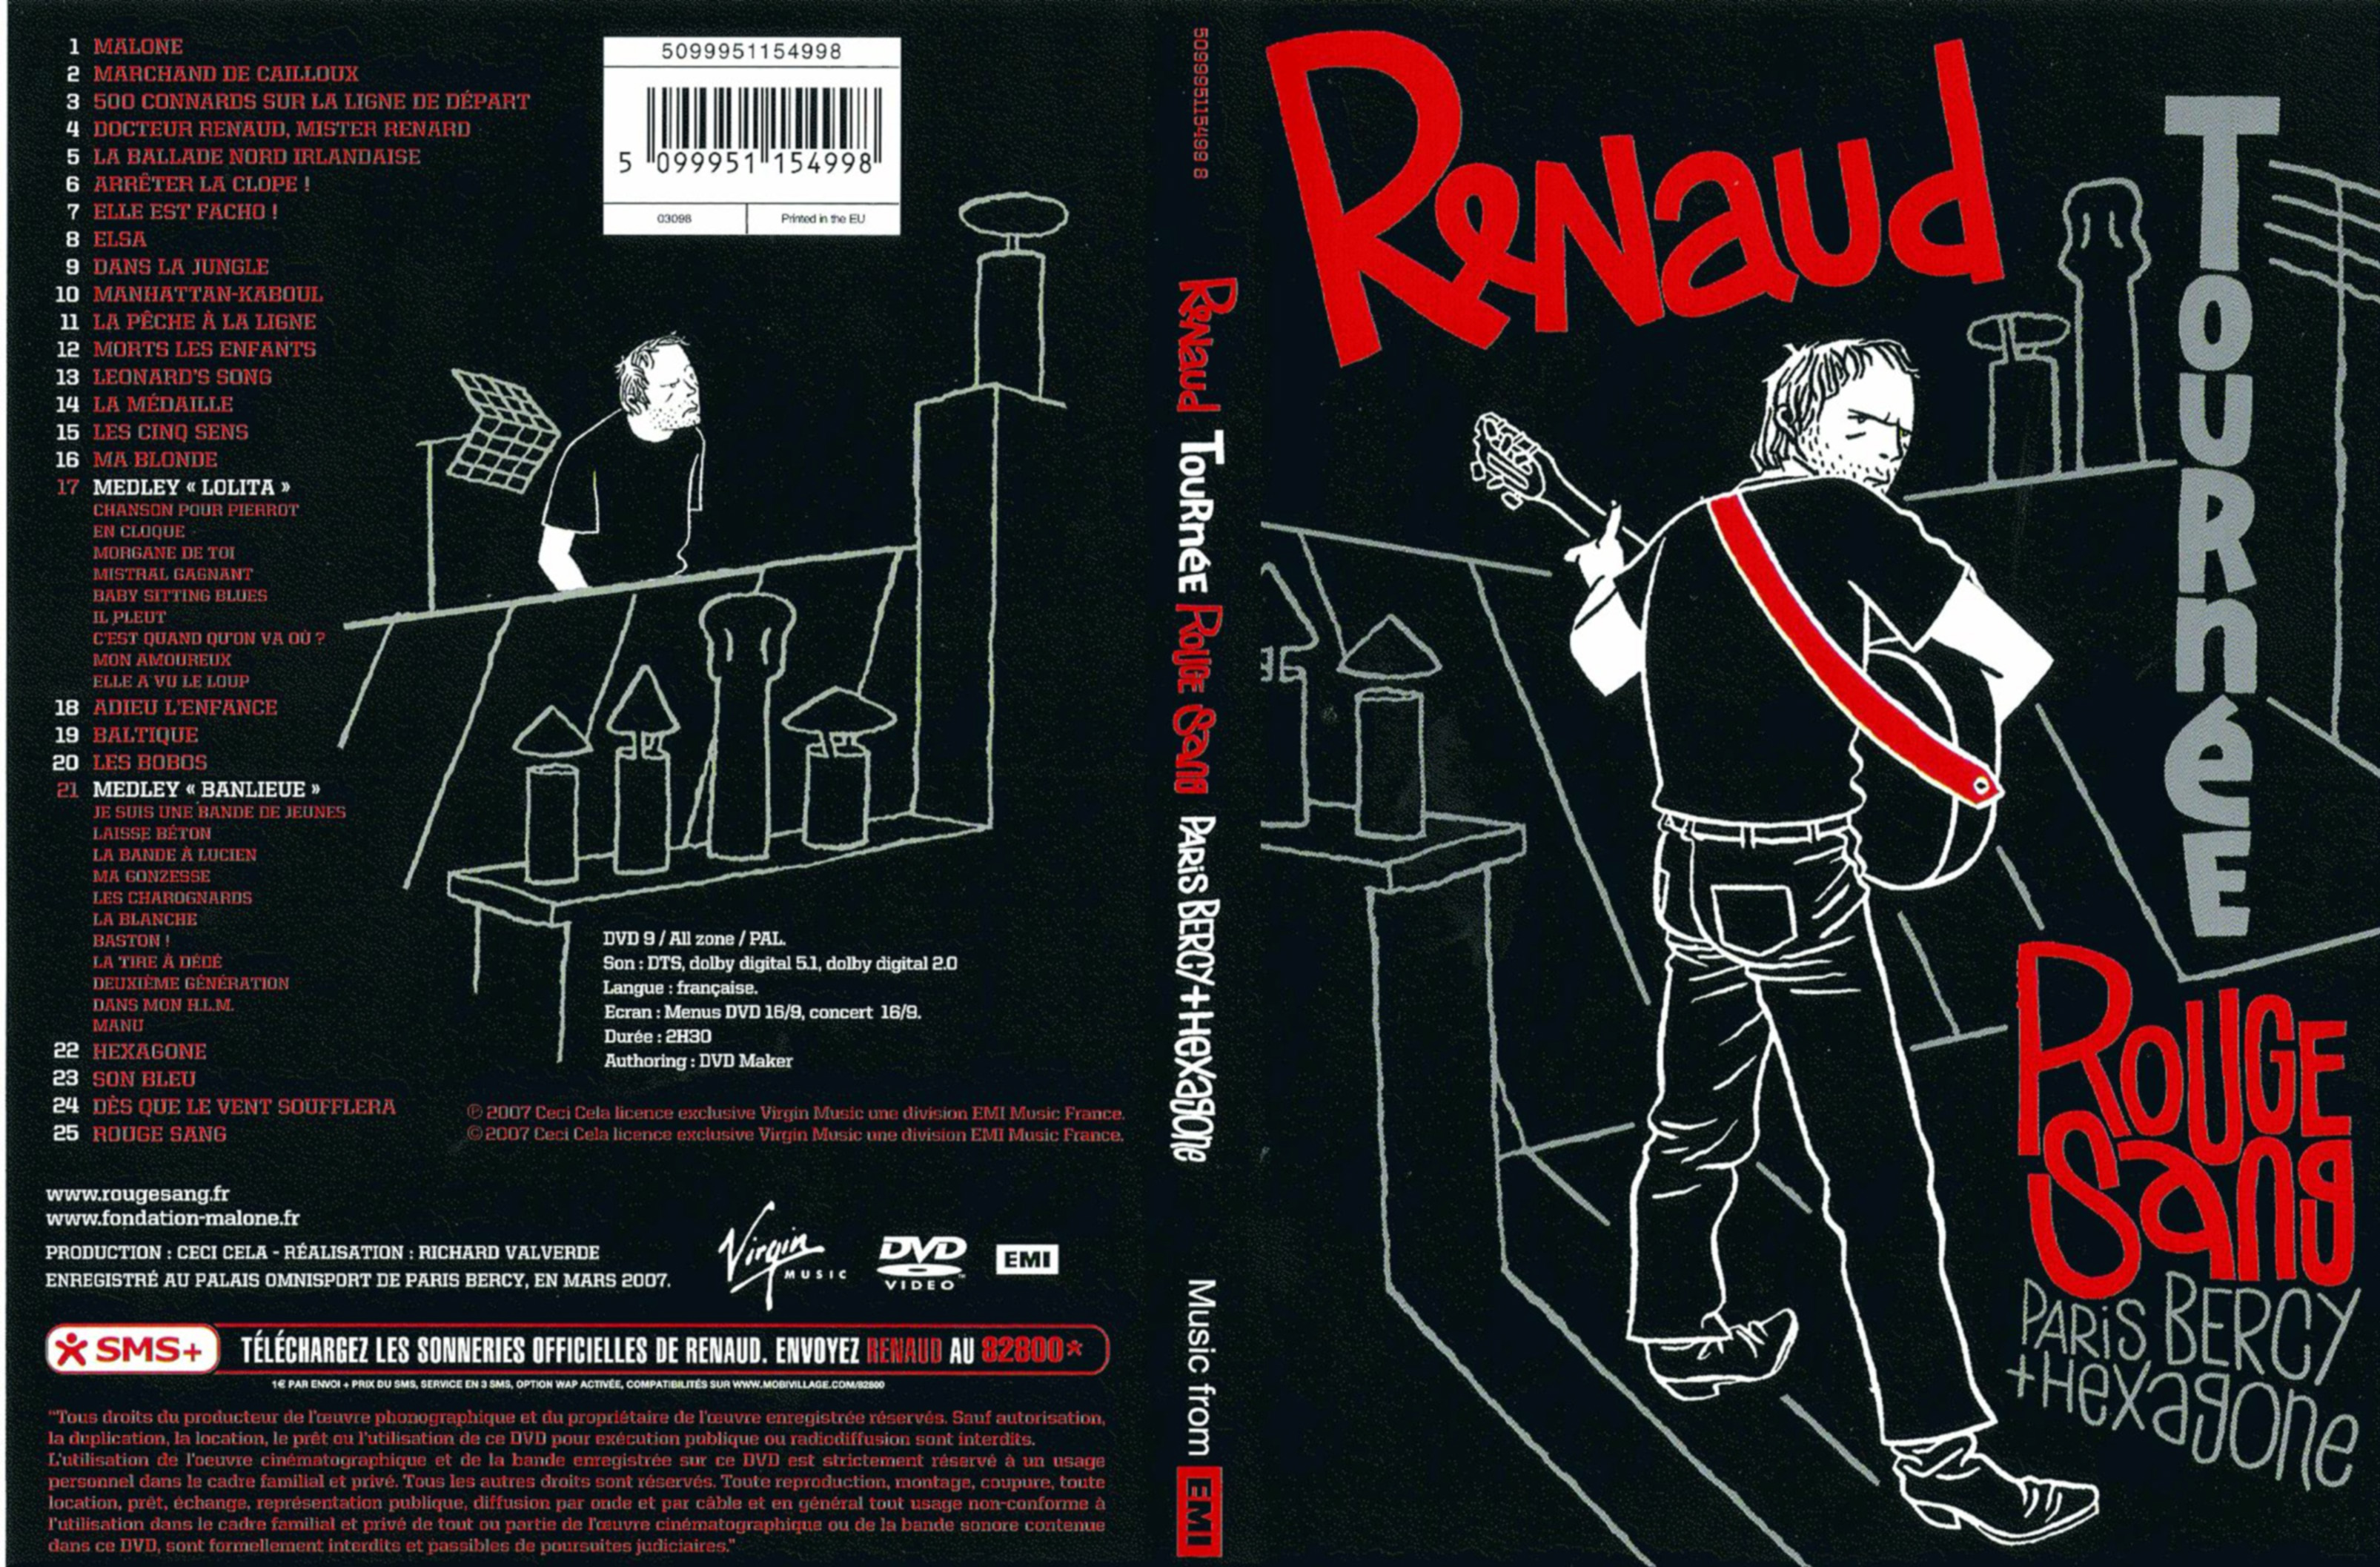 Jaquette DVD Renaud tourne rouge sang